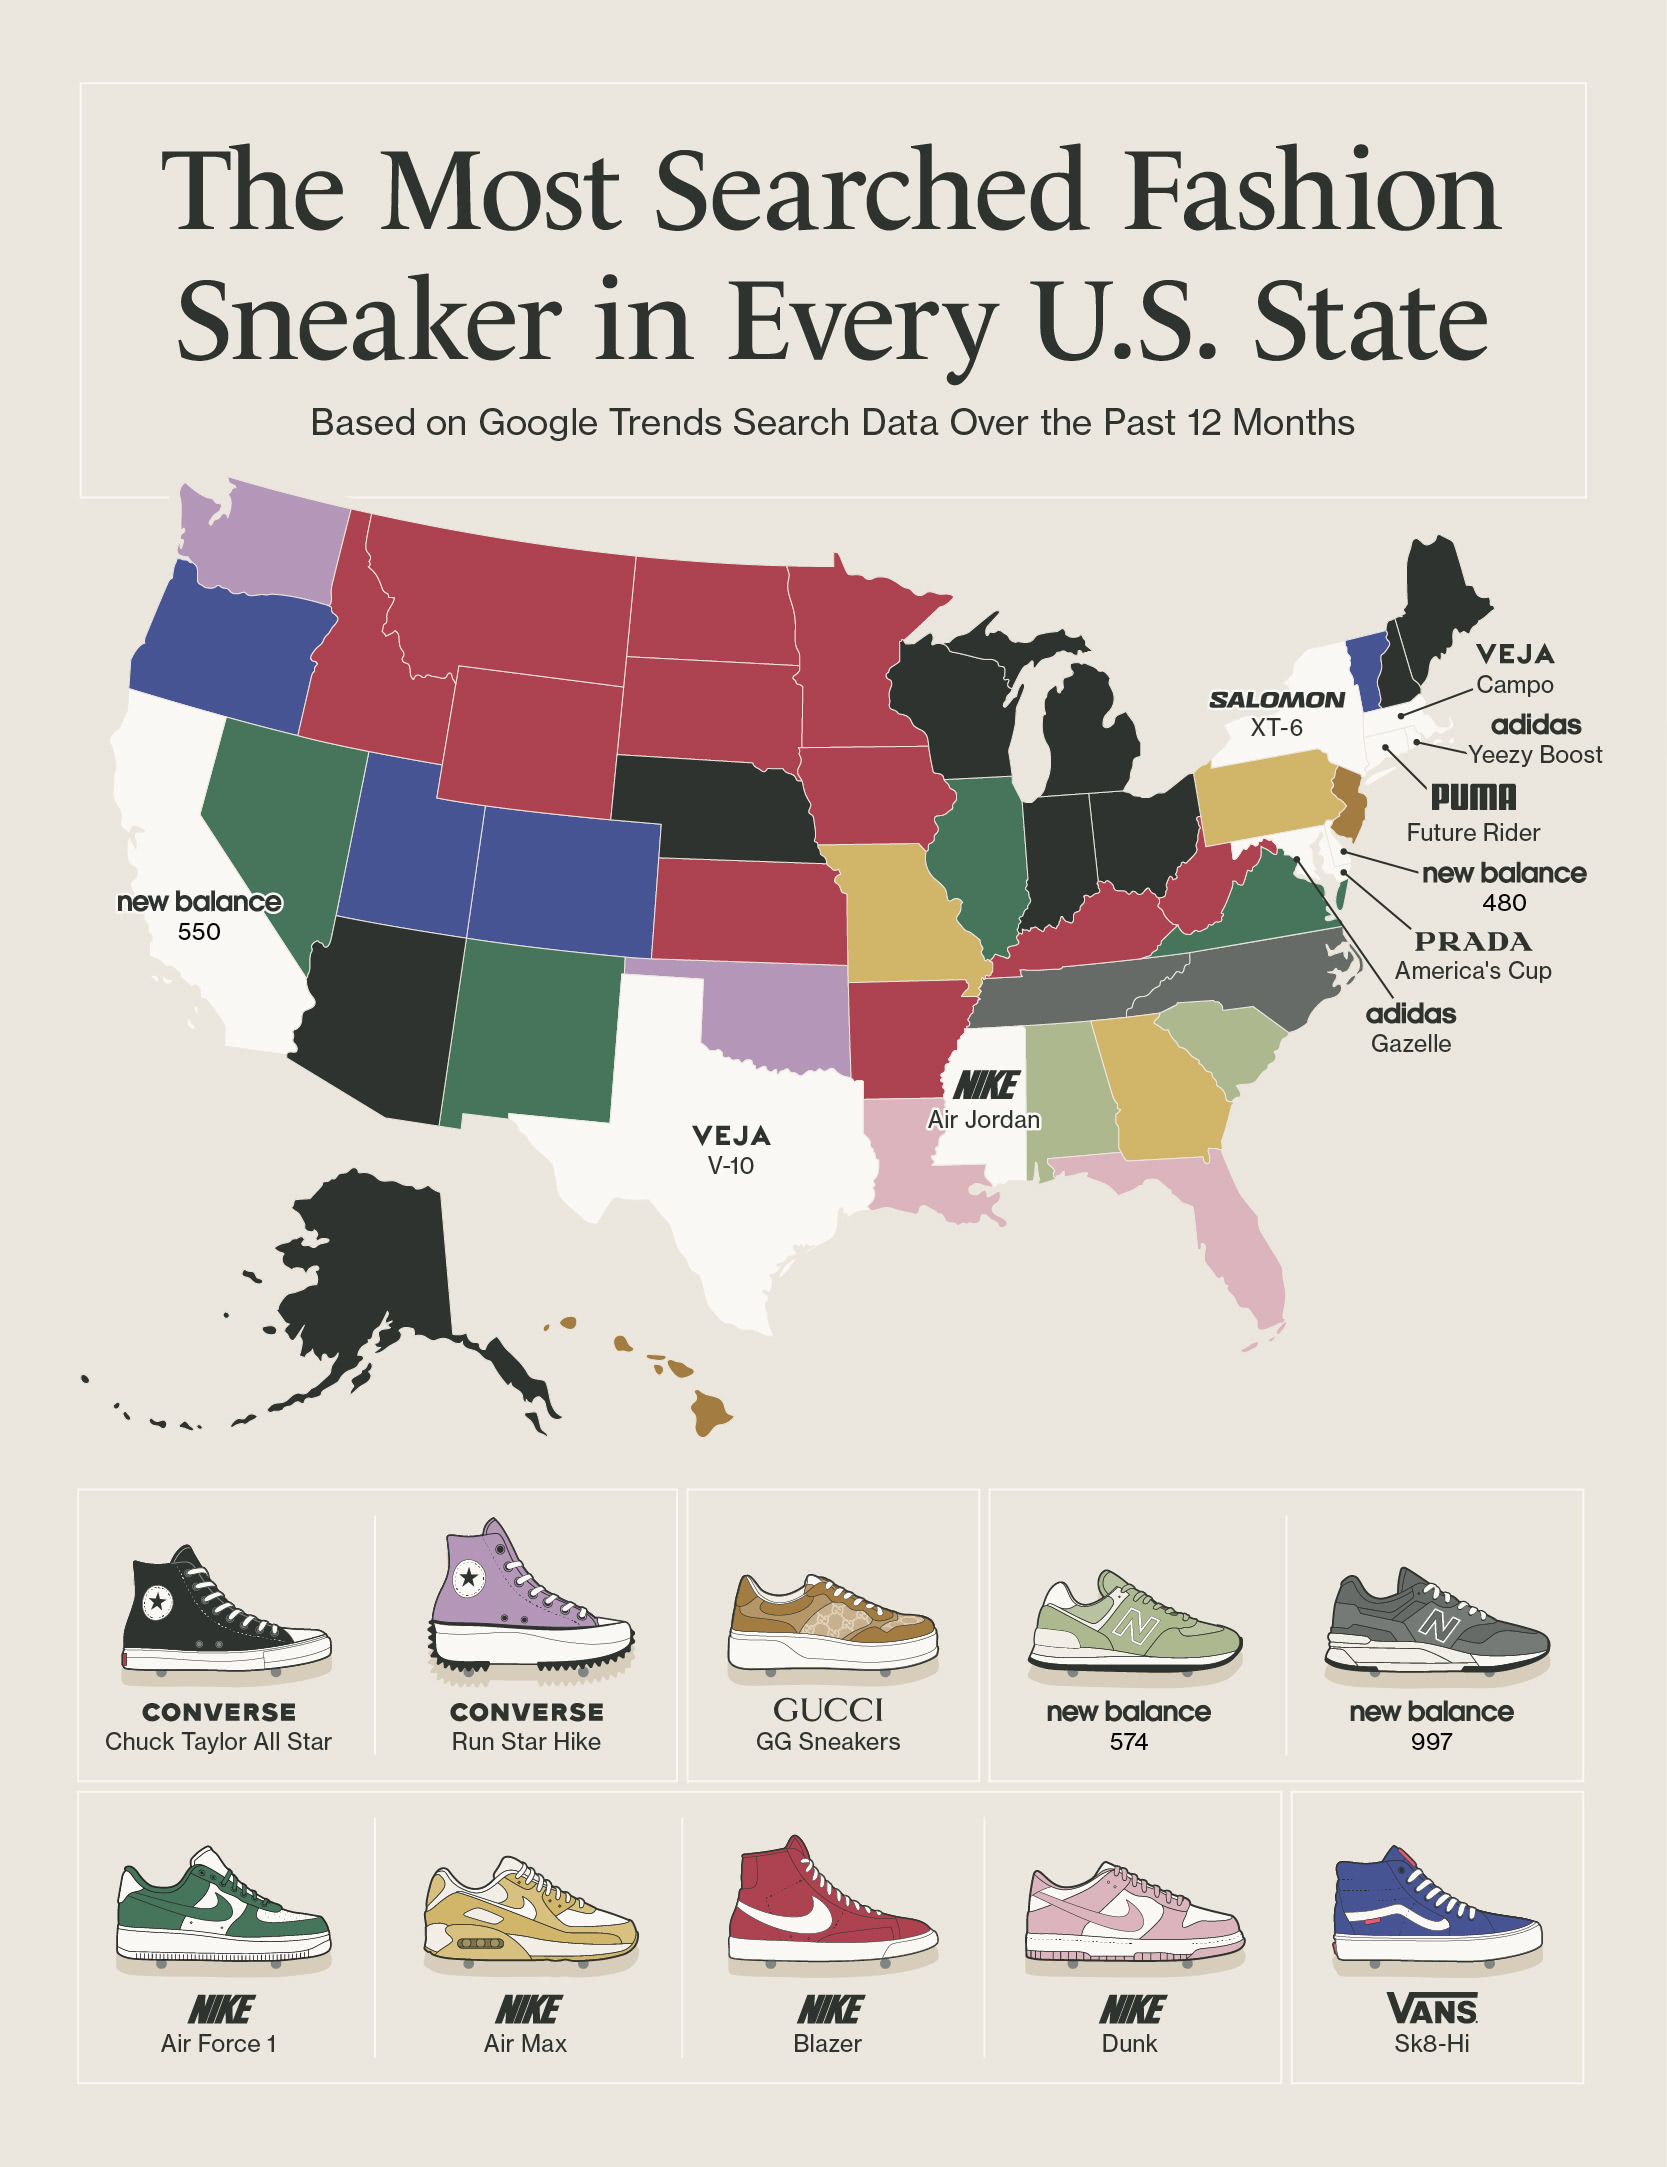 A U.S. map depicting the most popular fashionable sneaker model in each U.S. state.